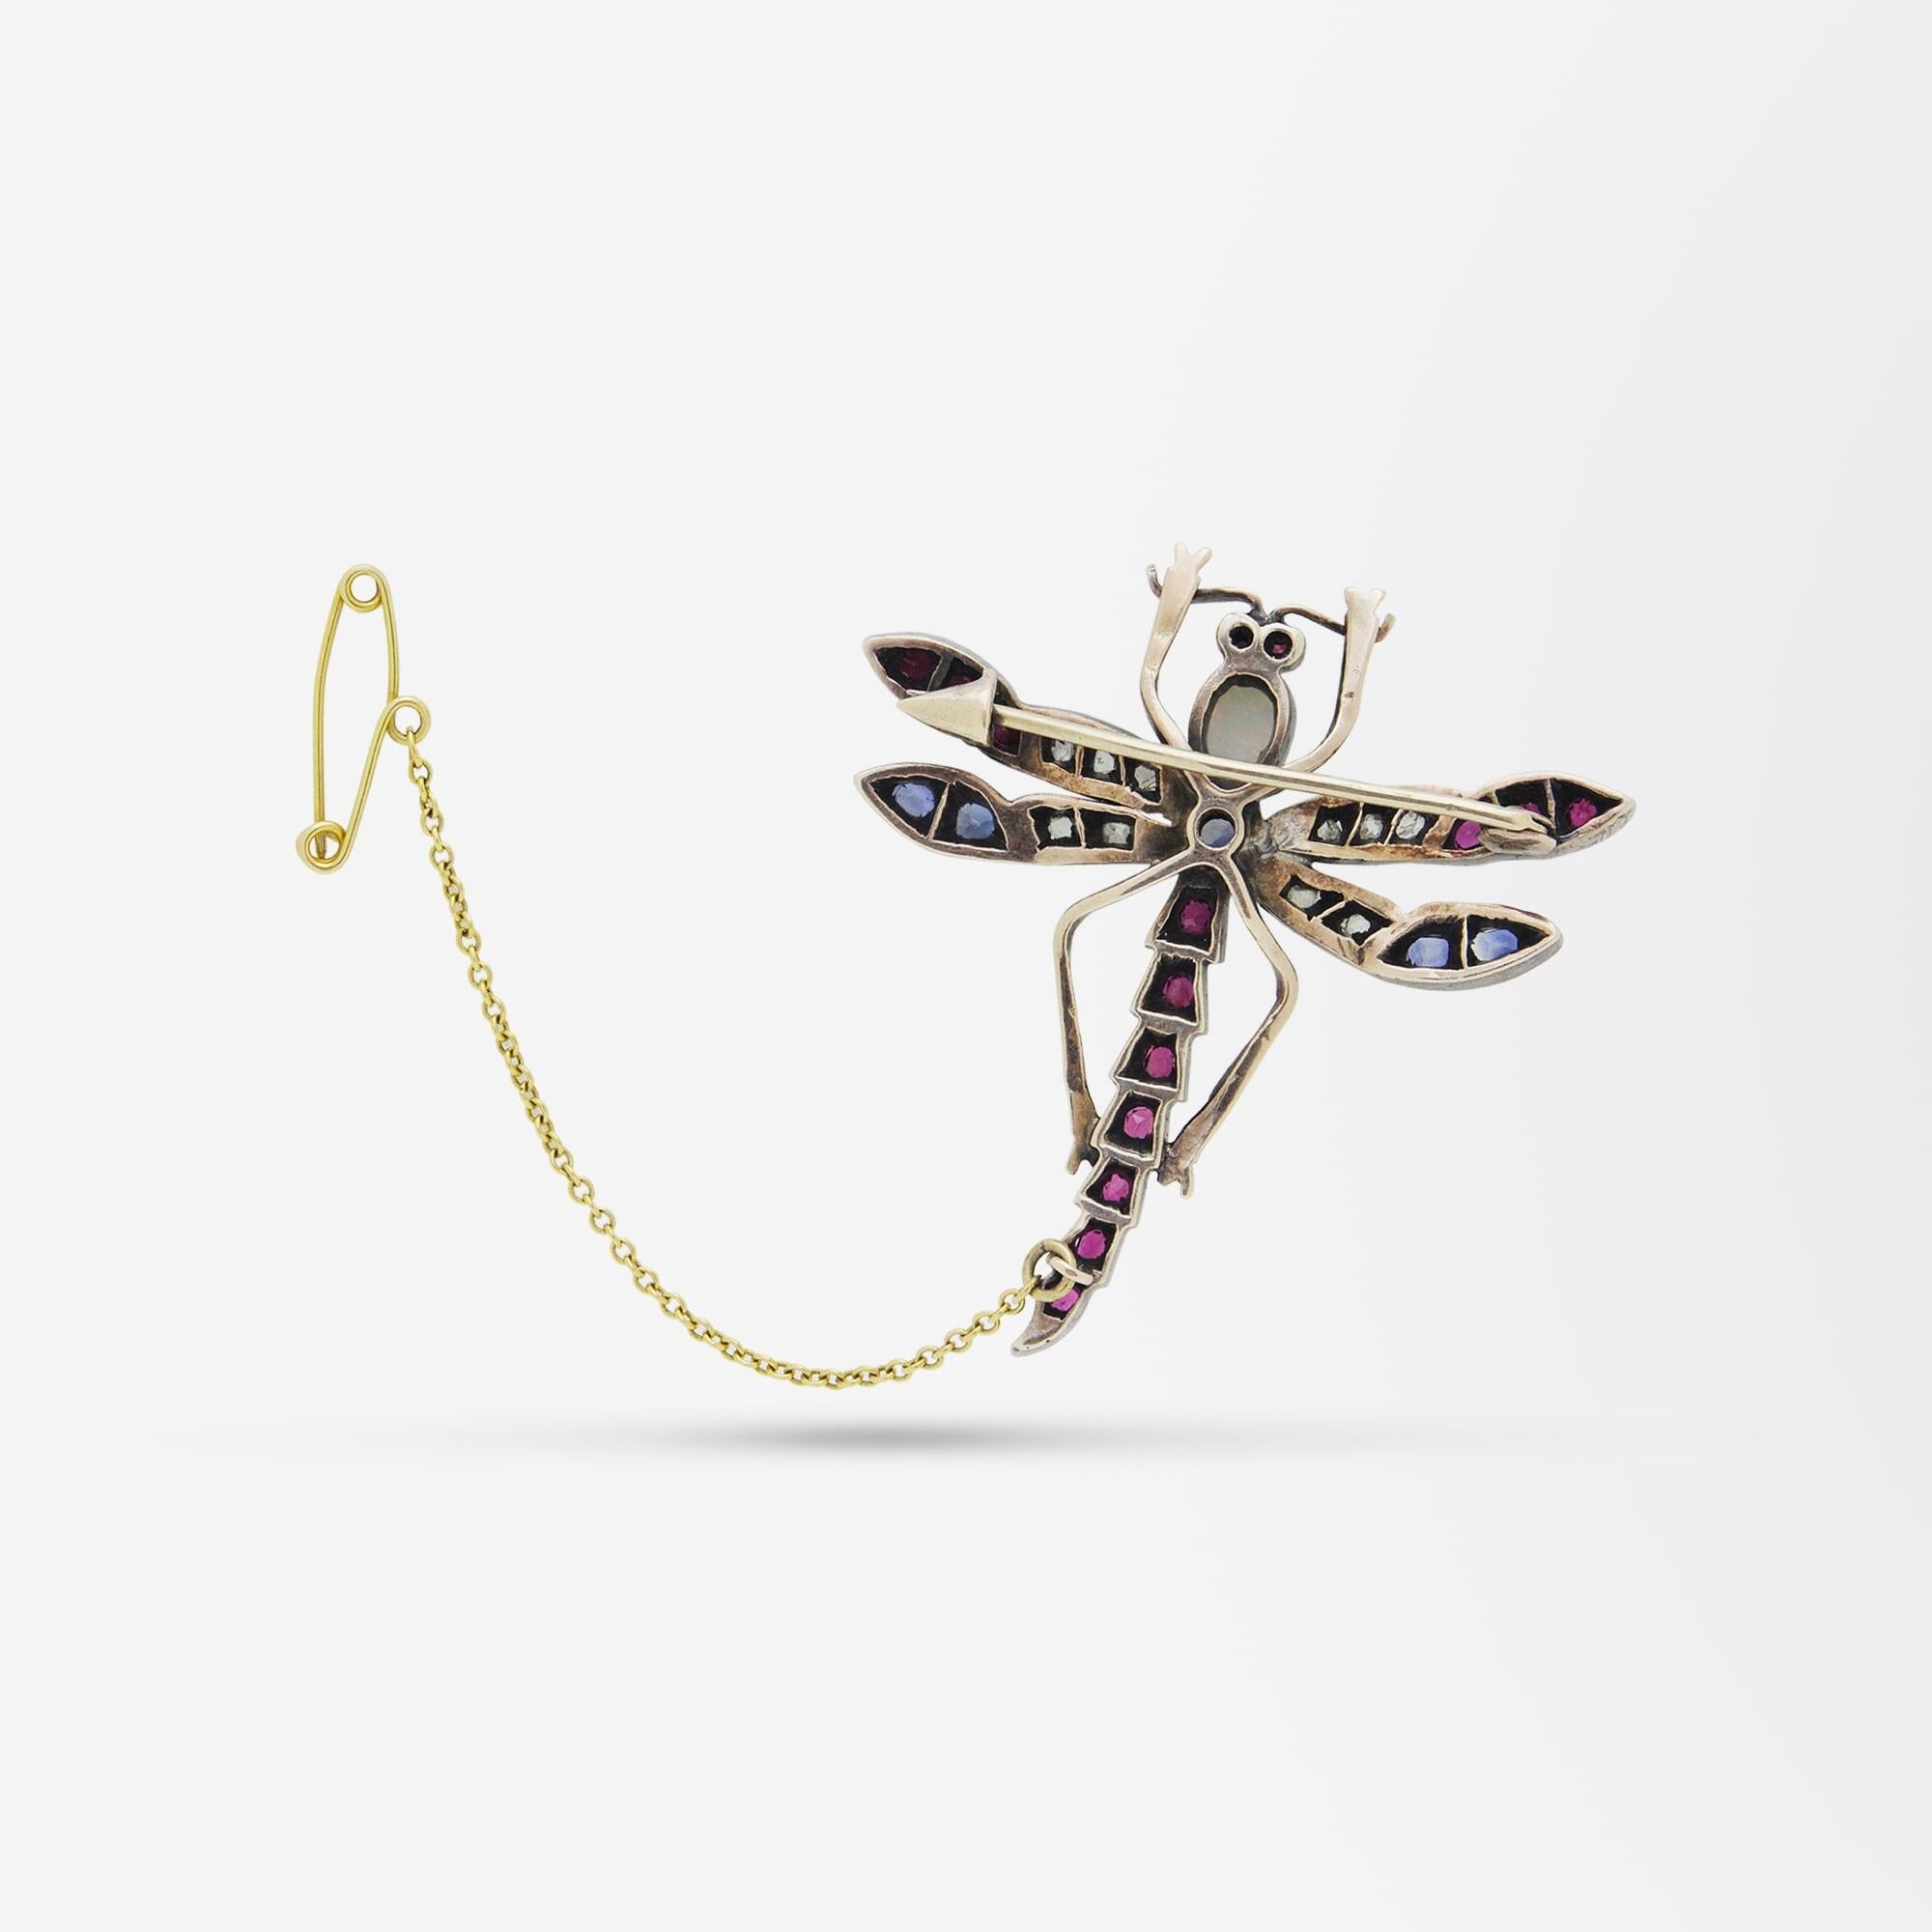 A fine Victorian era pin in the form of a dragonfly. The piece is constructed out of 9 karat rose gold which has a rich patina that has been set with Ceylon sapphires, Thai rubies and rose cut diamonds. The head of the dragonfly is set with a single